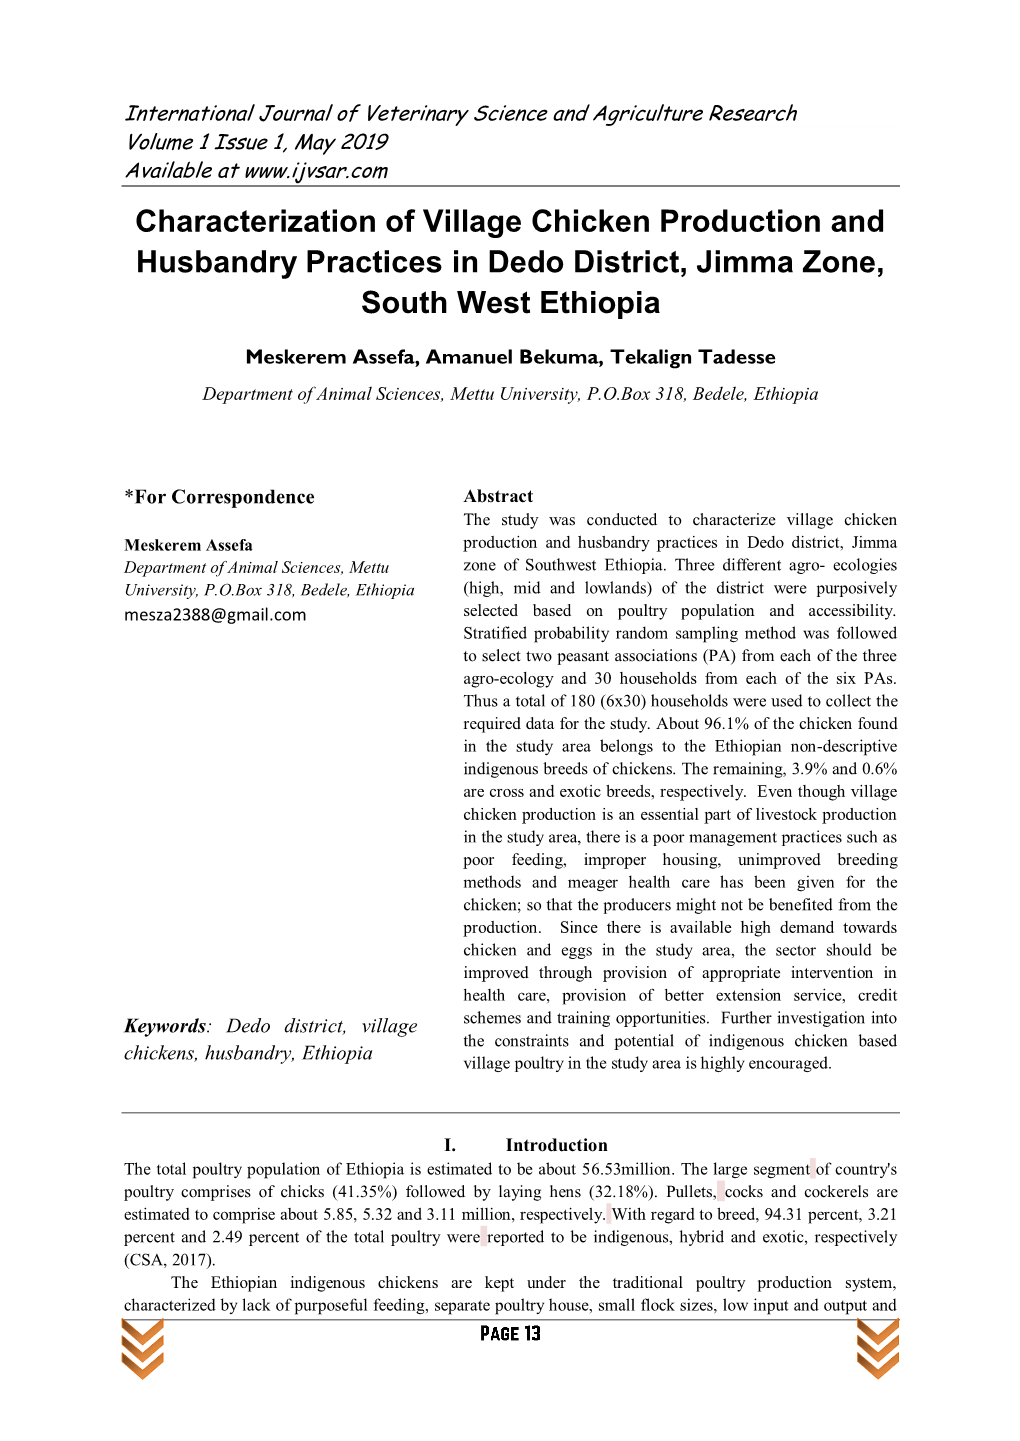 Characterization of Village Chicken Production and Husbandry Practices in Dedo District, Jimma Zone, South West Ethiopia